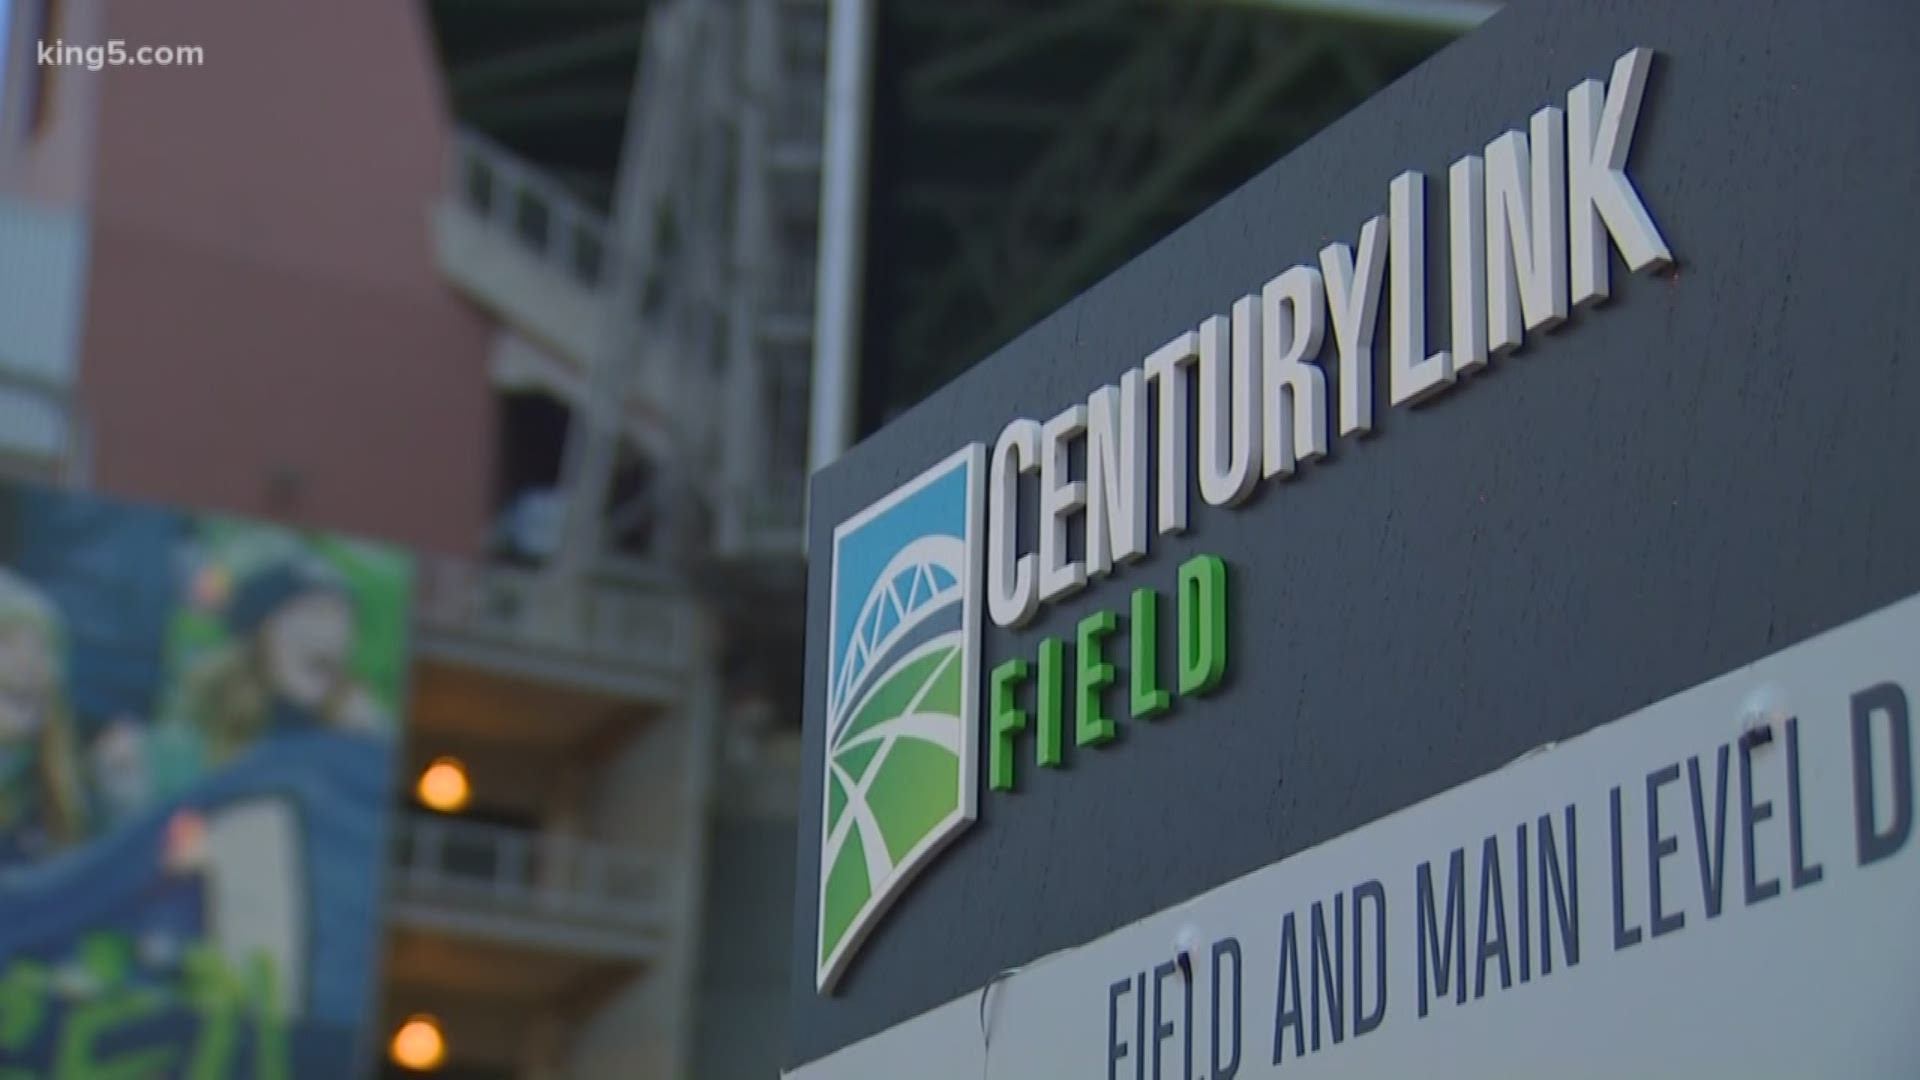 A part-time employee at CenturyLink Field who worked at the stadium Feb. 22 has tested positive for coronavirus.